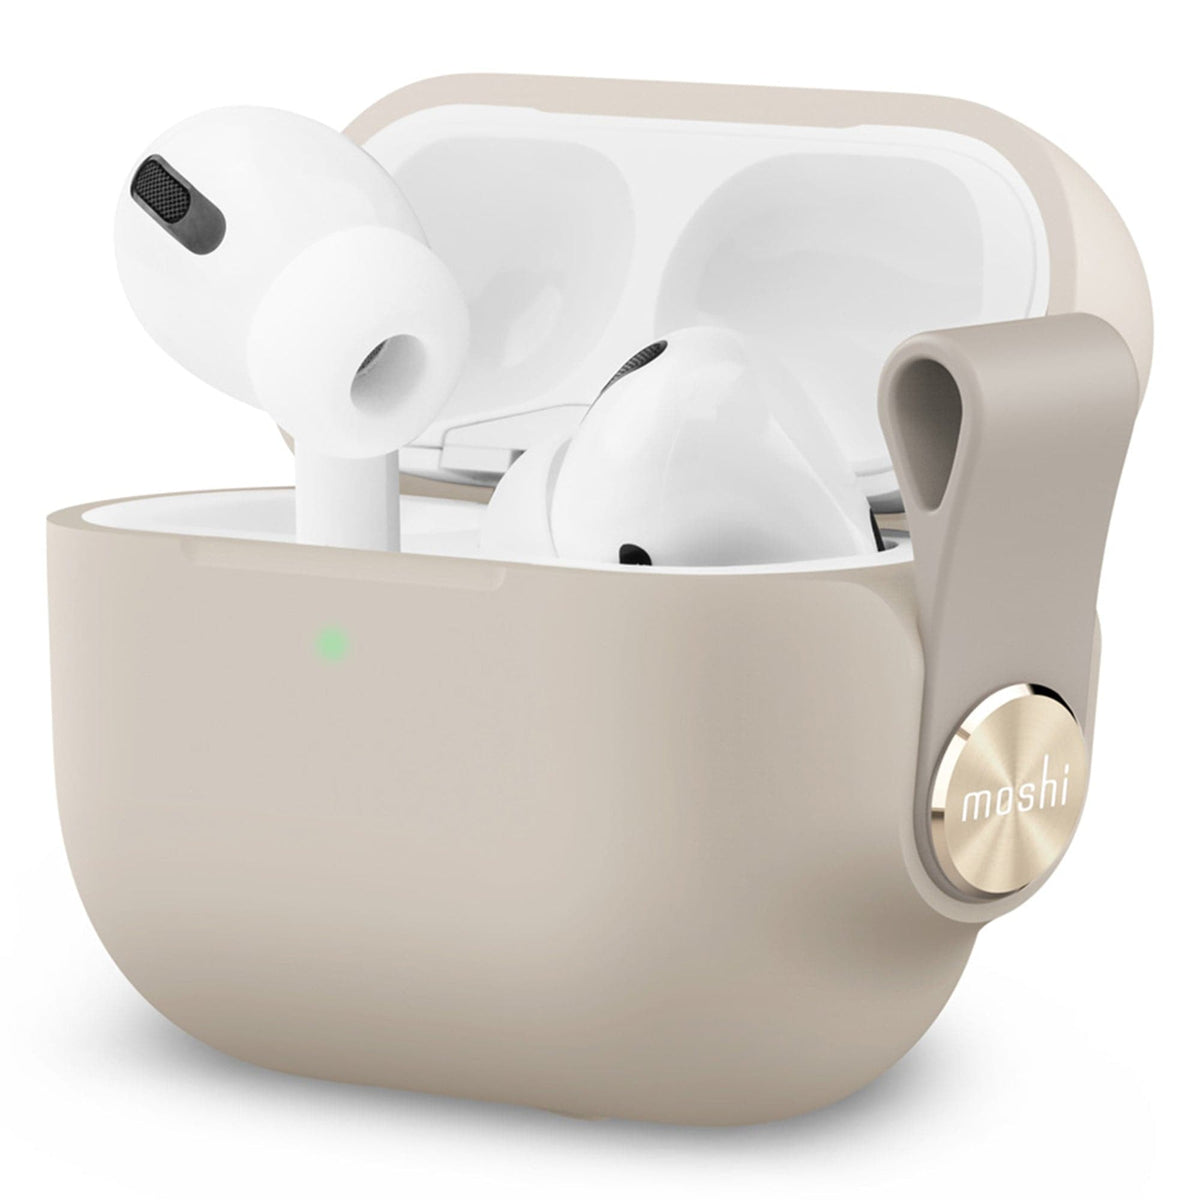 Moshi Pebbo for AirPods Pro, AirPods Case with Detachable Wrist Strap and LintGuard Protection